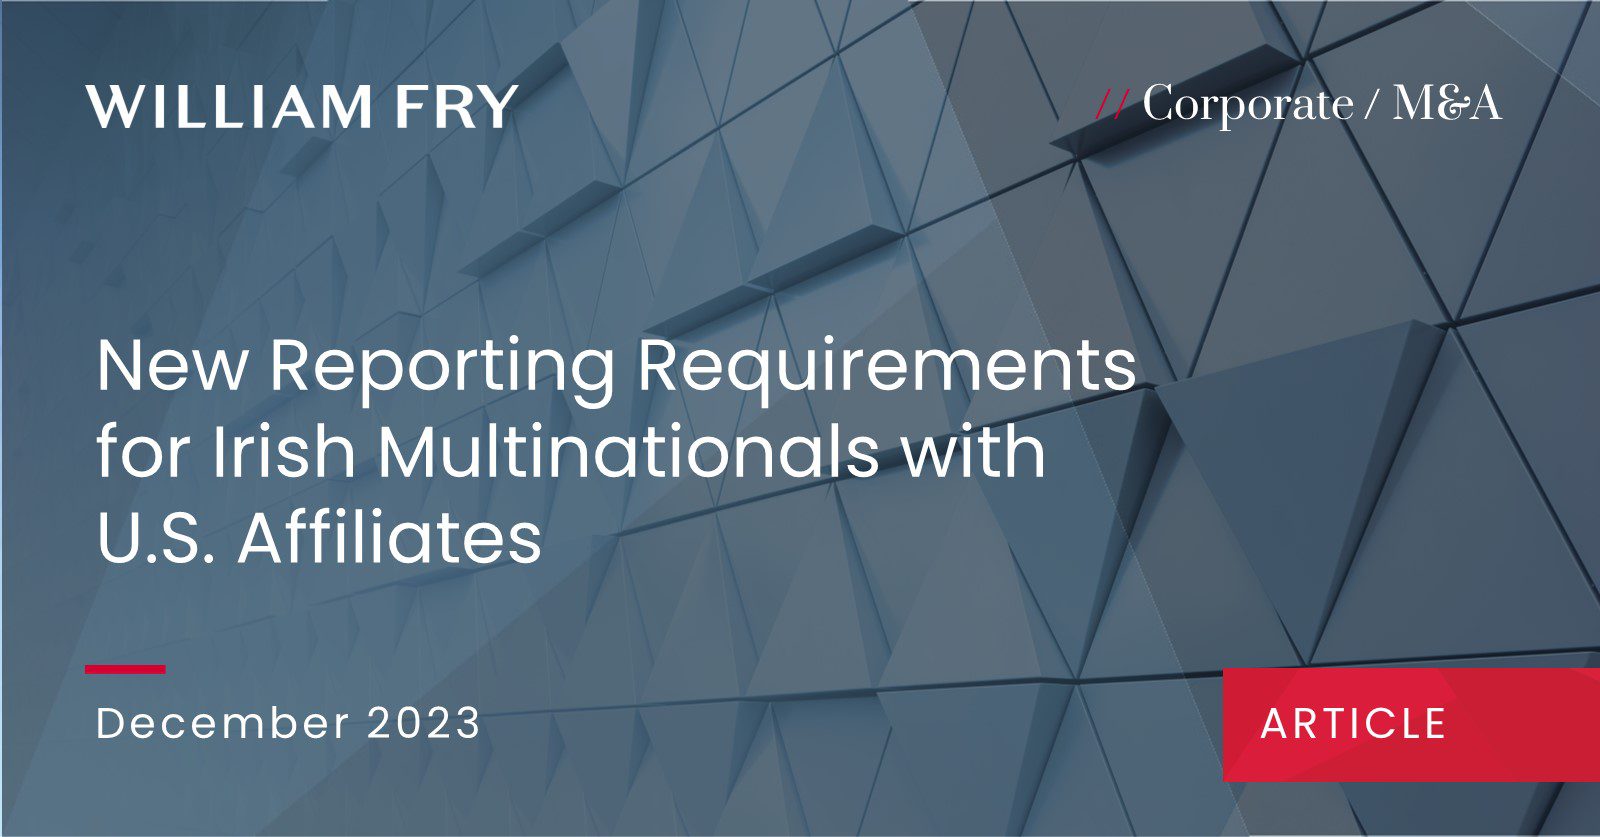 New Reporting Requirements for Irish Multinationals with U.S. Affiliates